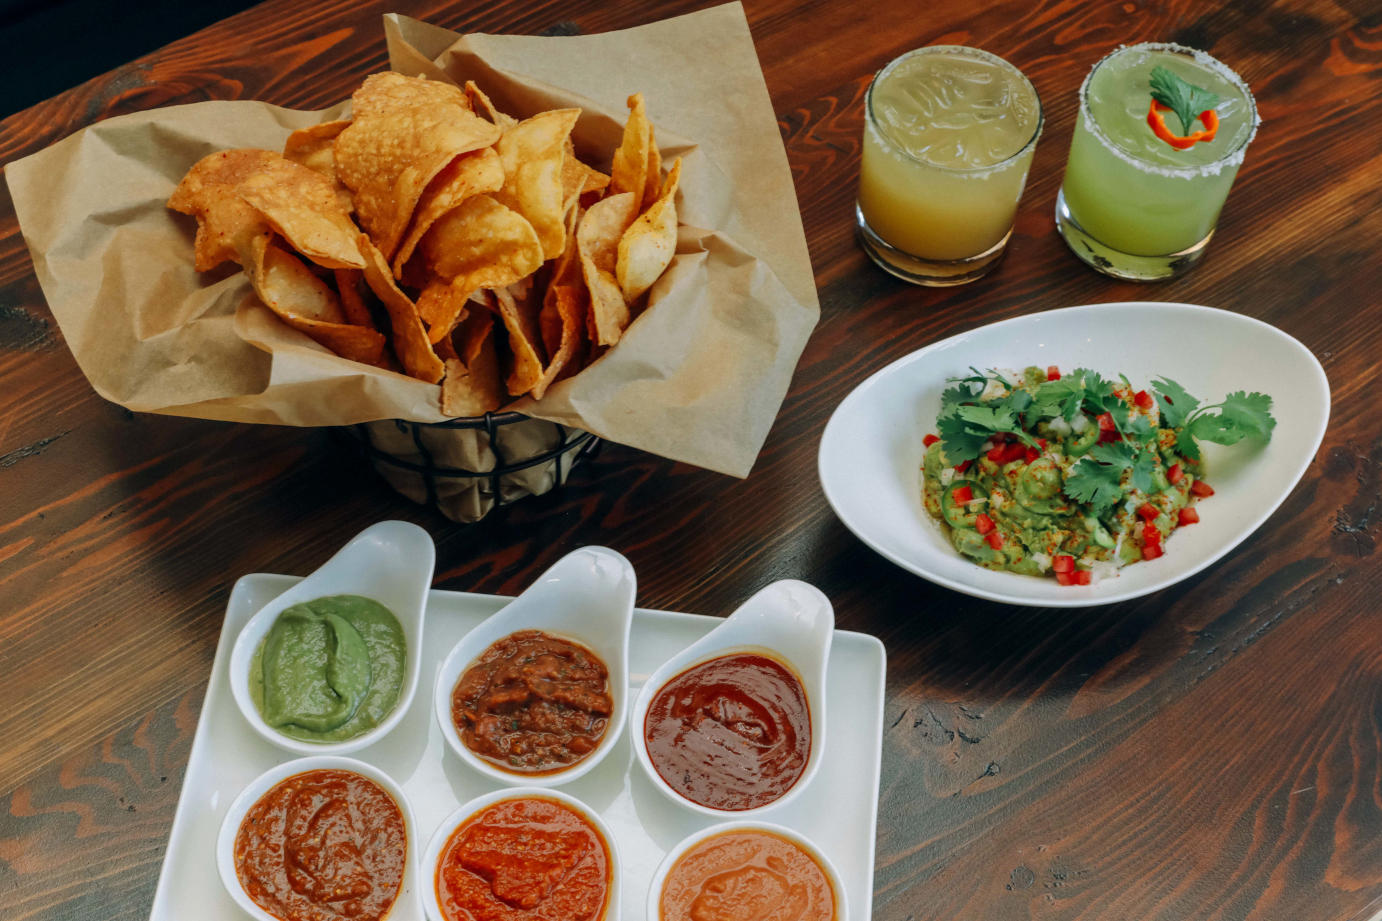 Nachos with dips and guac sauce